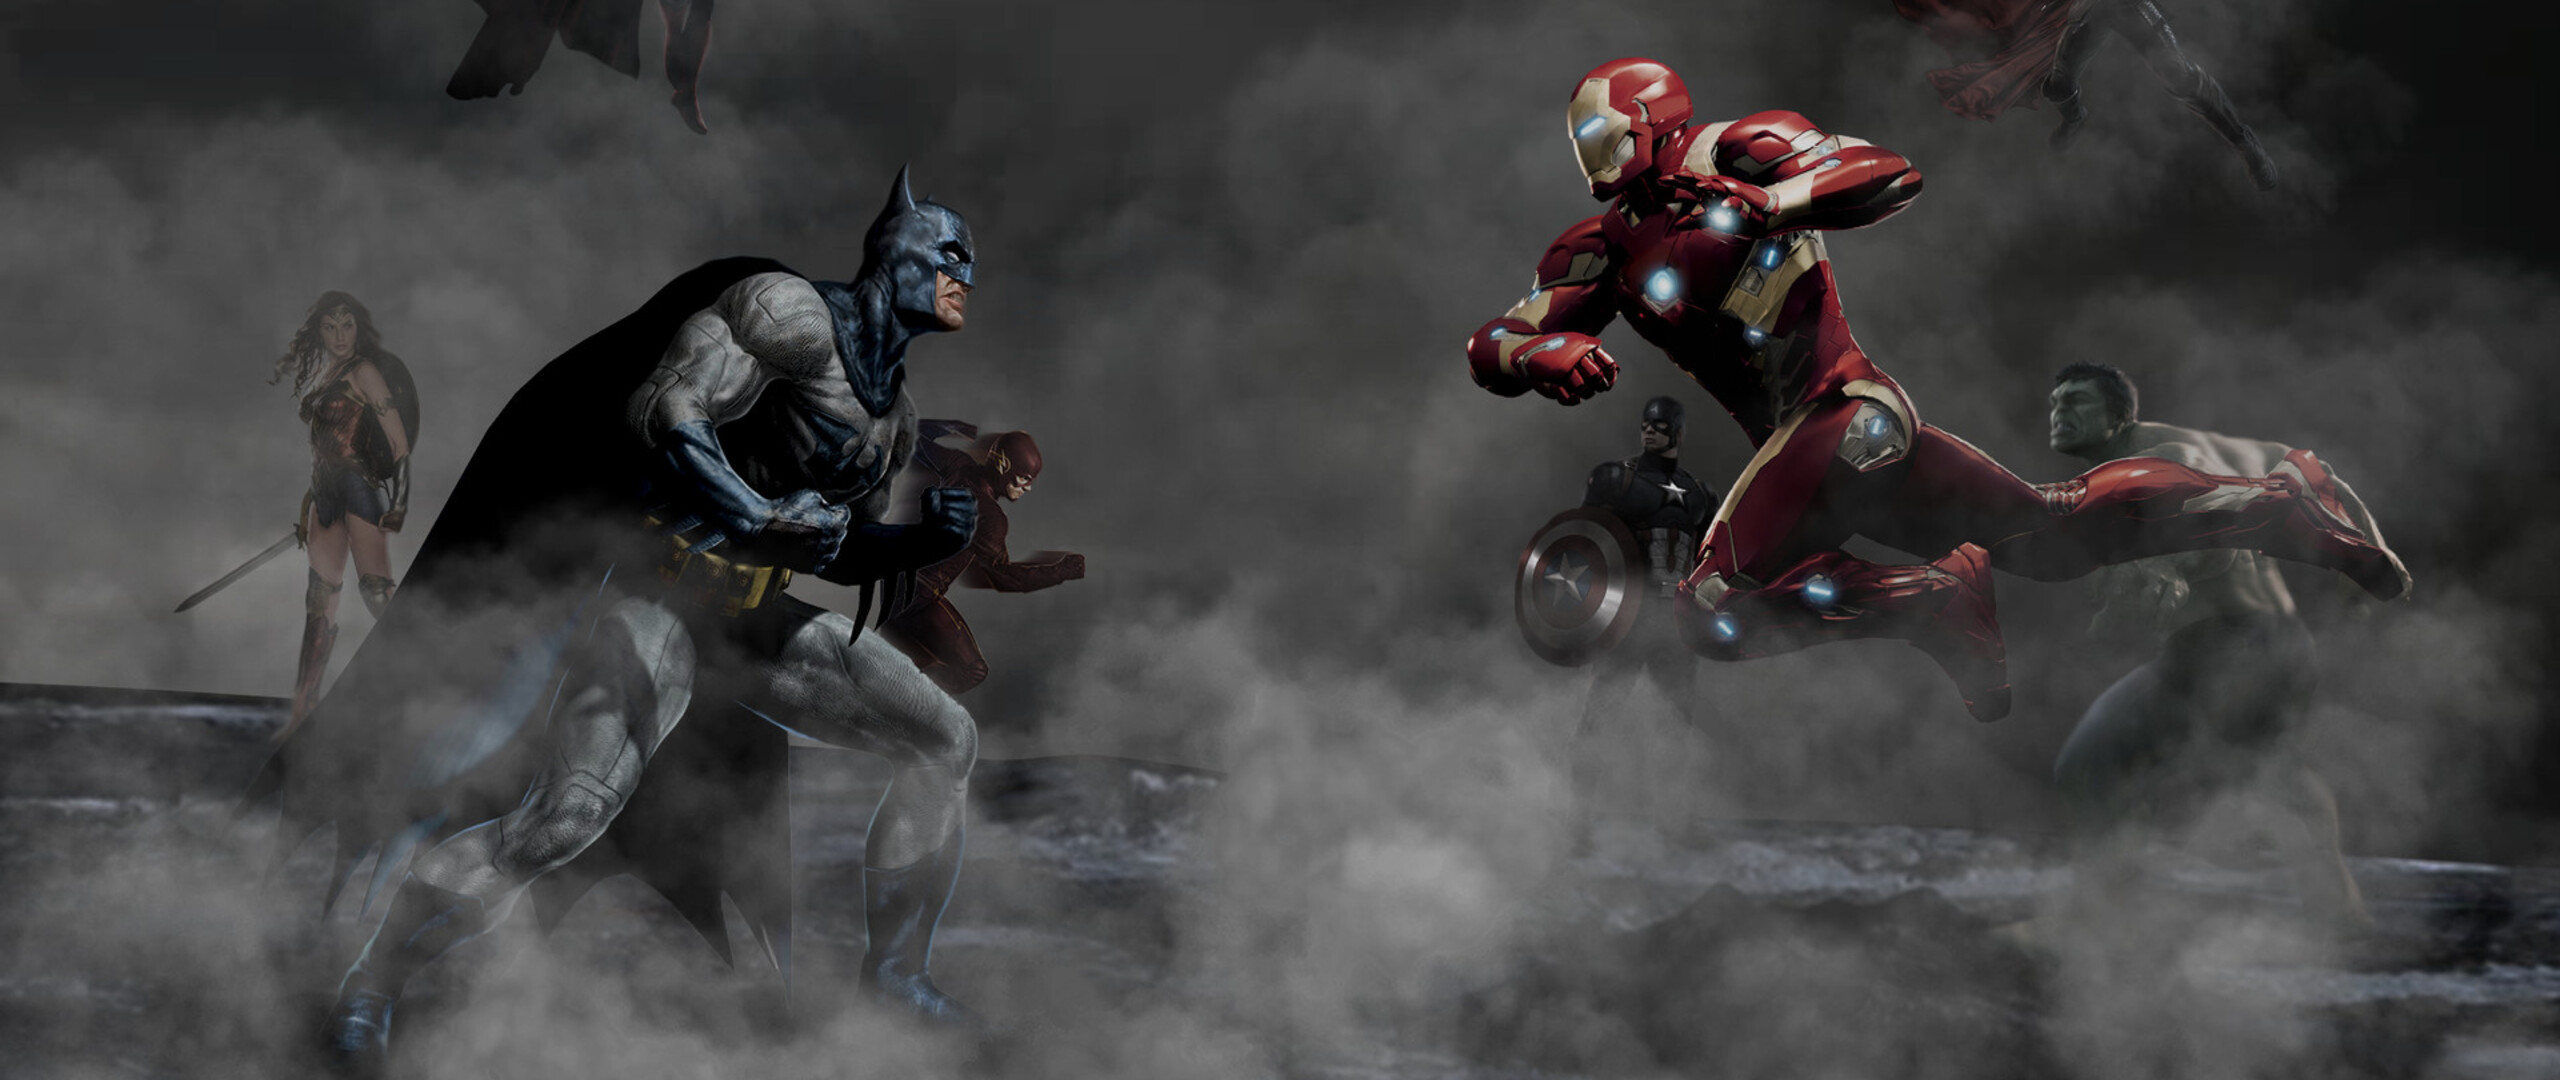 Justice League Vs The Avengers In 2560x1080 Resolution. justice-league-...